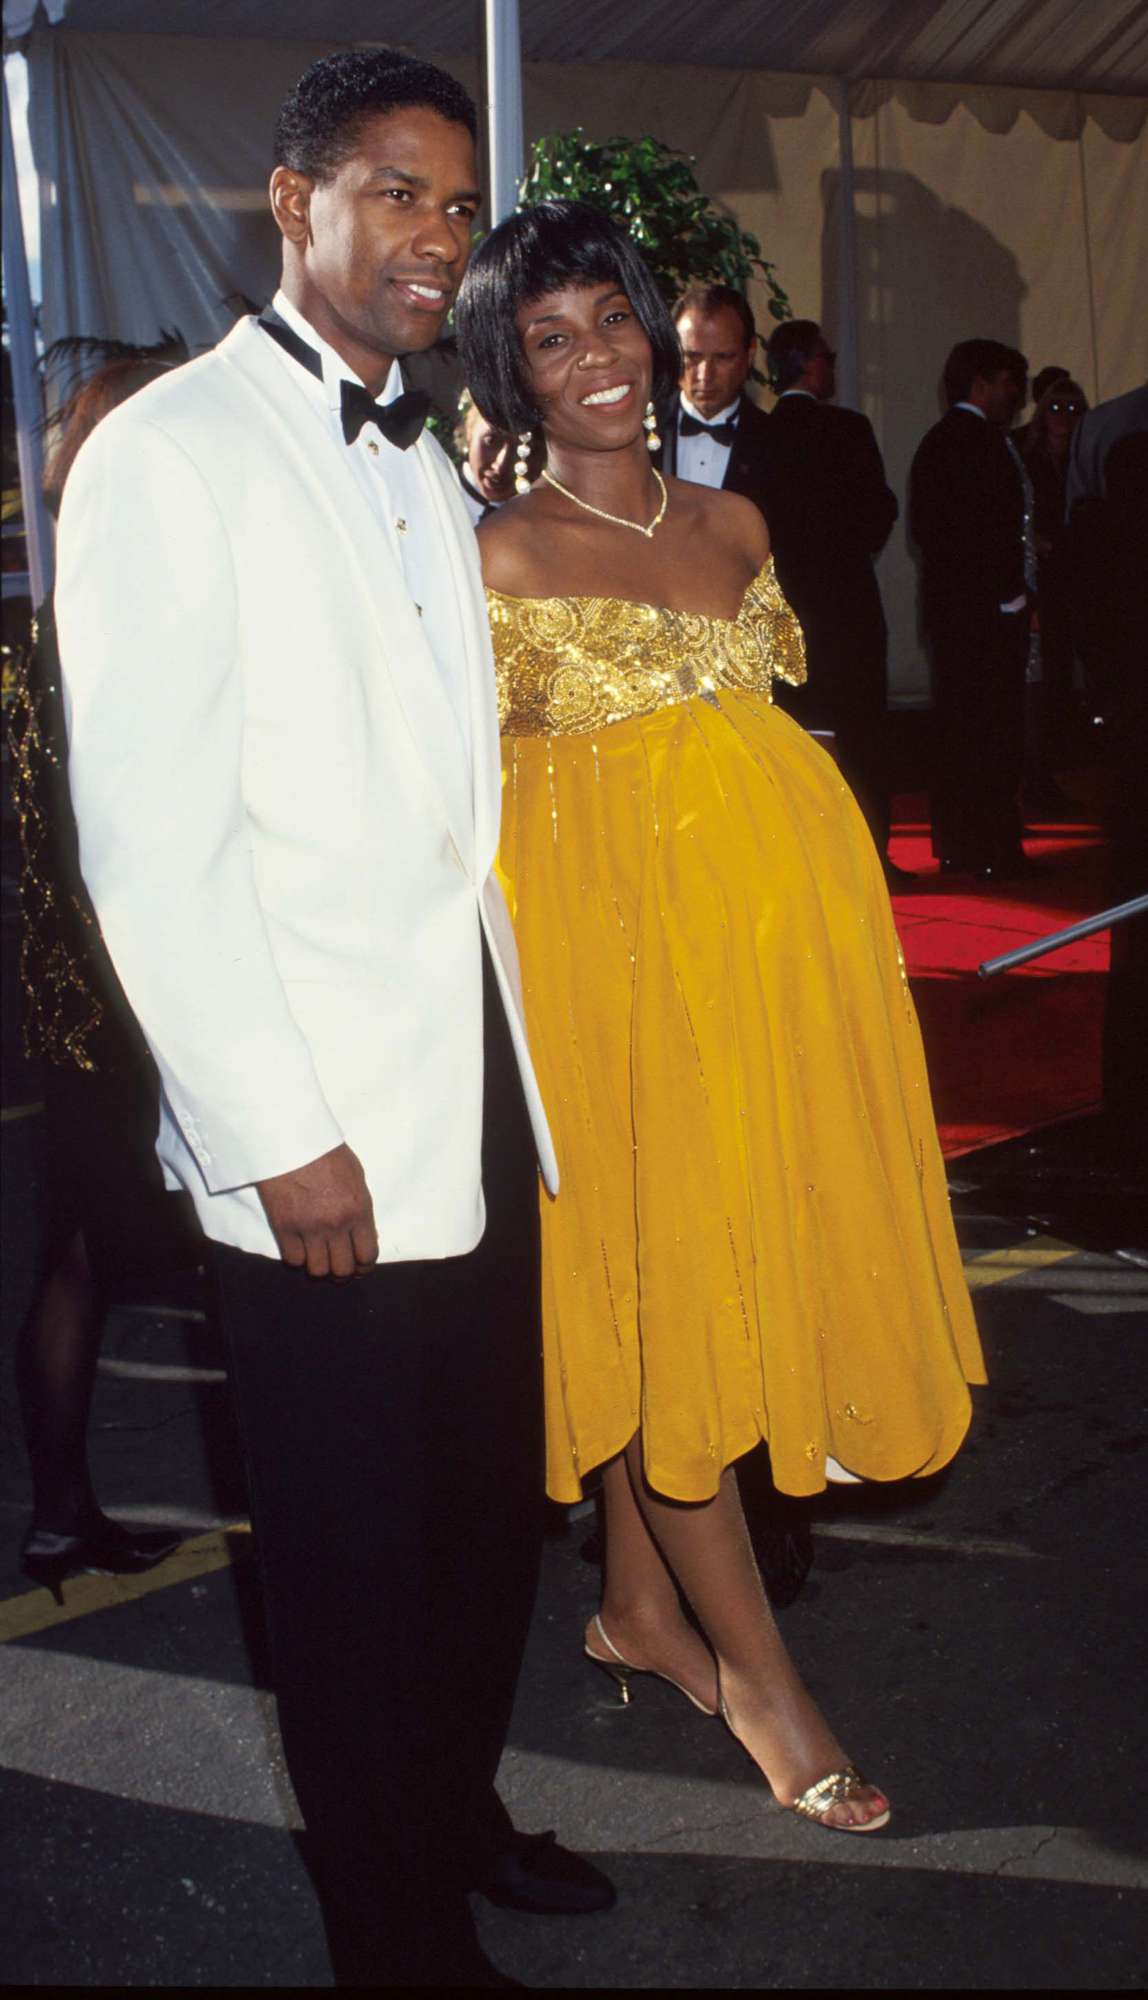 Denzel Washington poses with wife Paulette Washington March 25, 1991 in Los Angeles, CA. The Academy Awards are the foremost national film awards in the US and are given annually by the Academy of Motion Picture Arts and Sciences for excellence in the creation and production of motion pictures